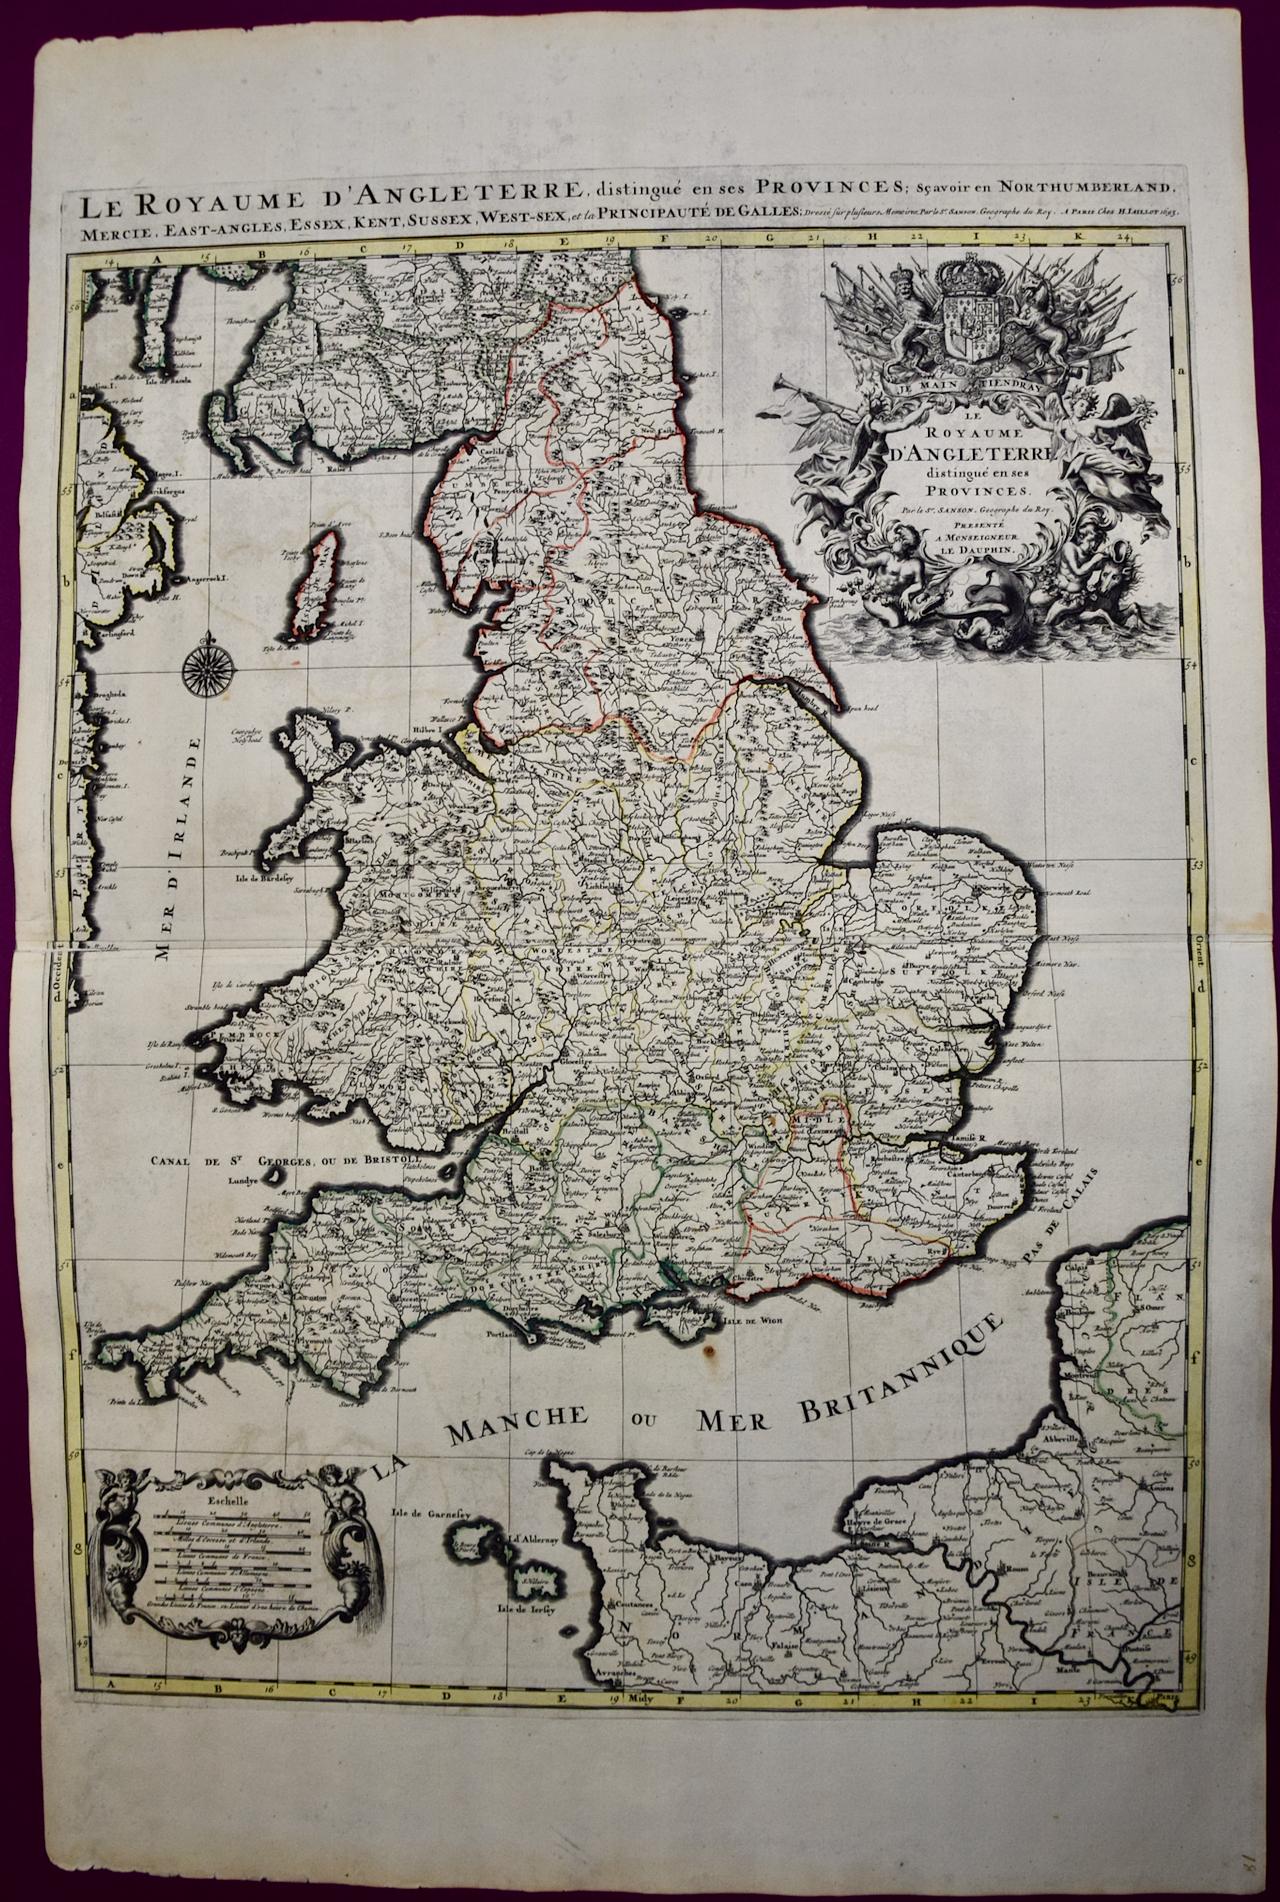 Great Britain, N. France: A Large 17th C. Hand-colored Map by Sanson and Jaillot